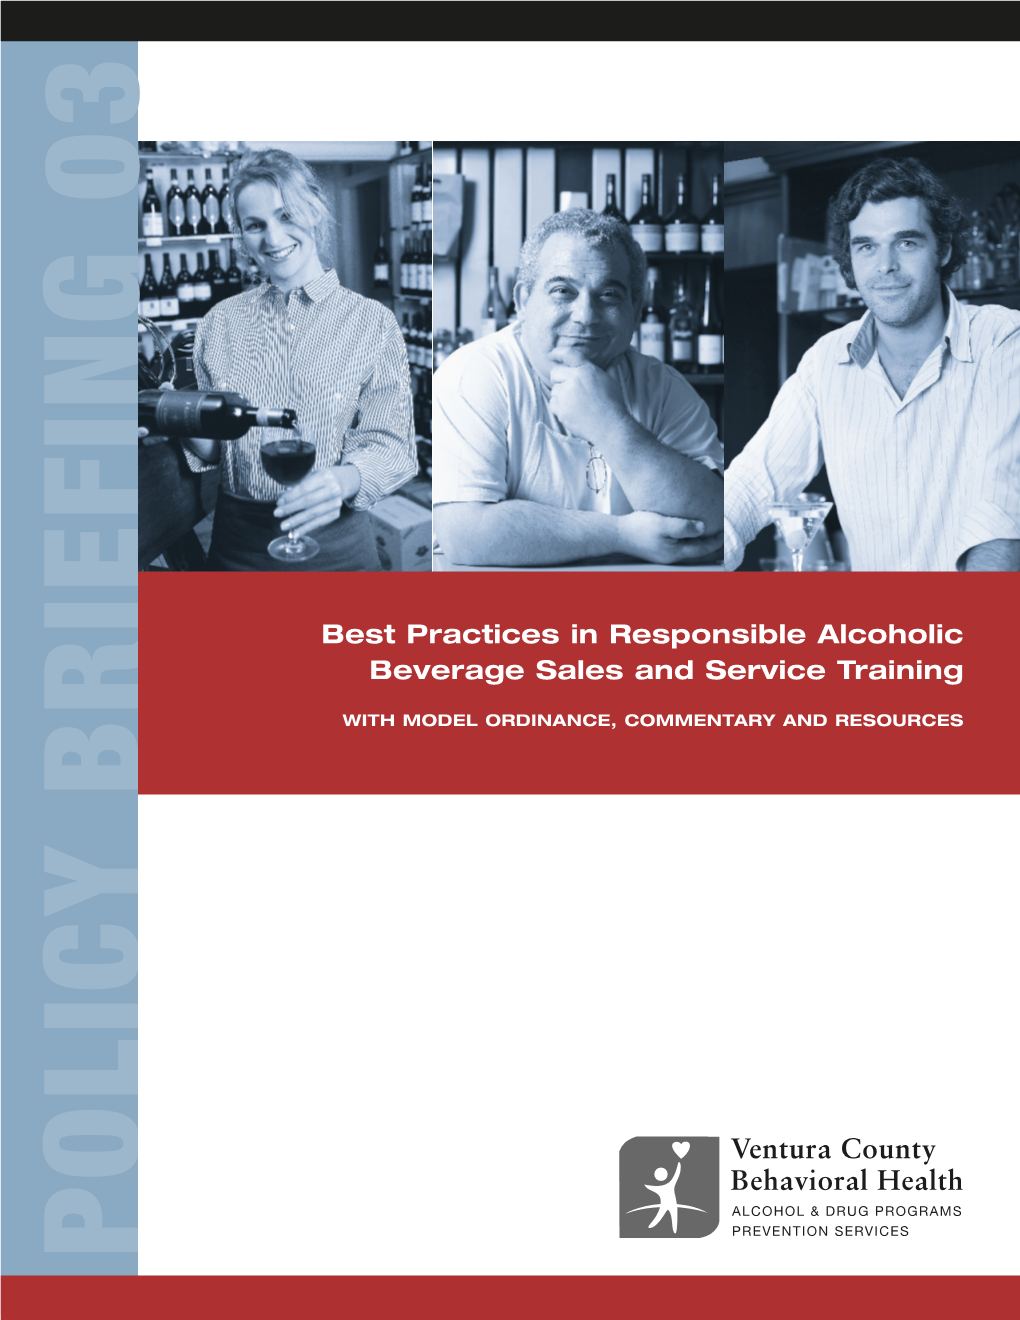 Best Practices in Responsible Alcoholic Beverage Sales and Service Training, with Model Ordinance, Commentary, and Resources